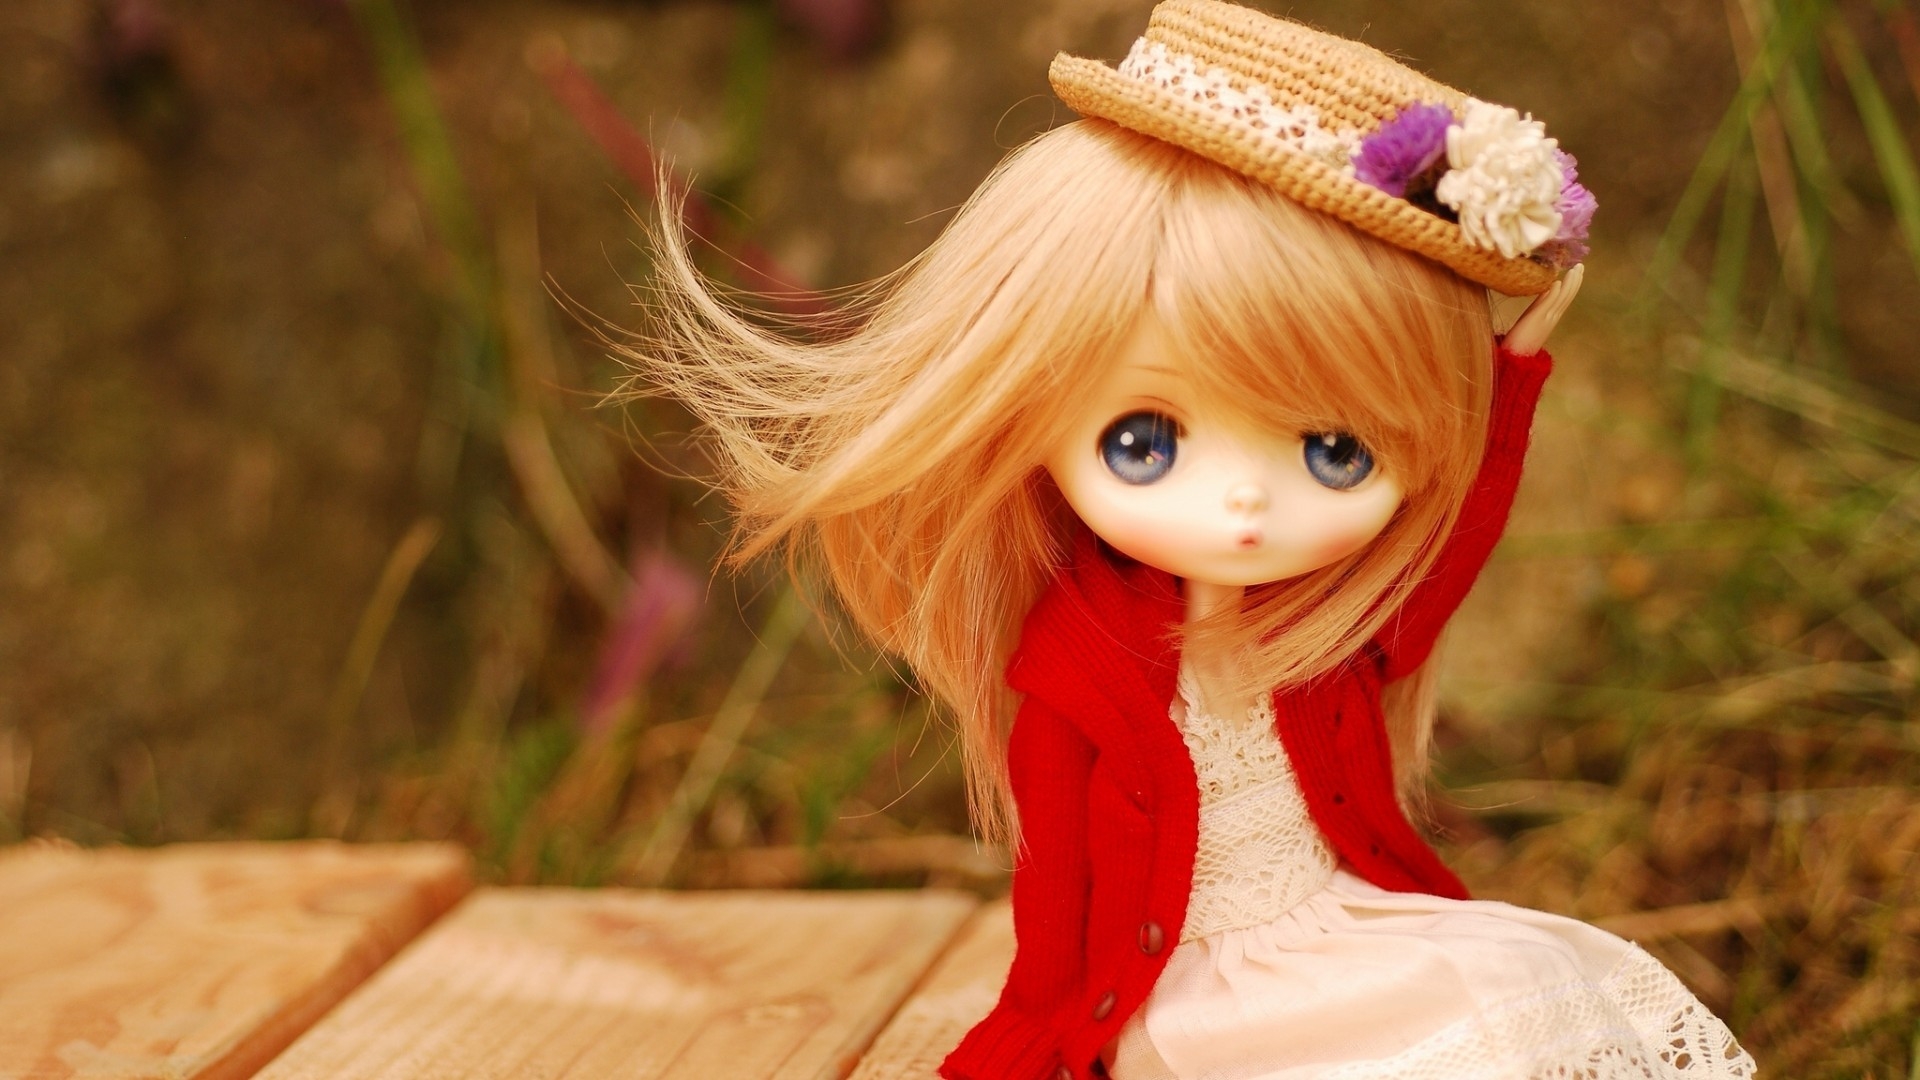 Cute Little Doll for 1920 x 1080 HDTV 1080p resolution